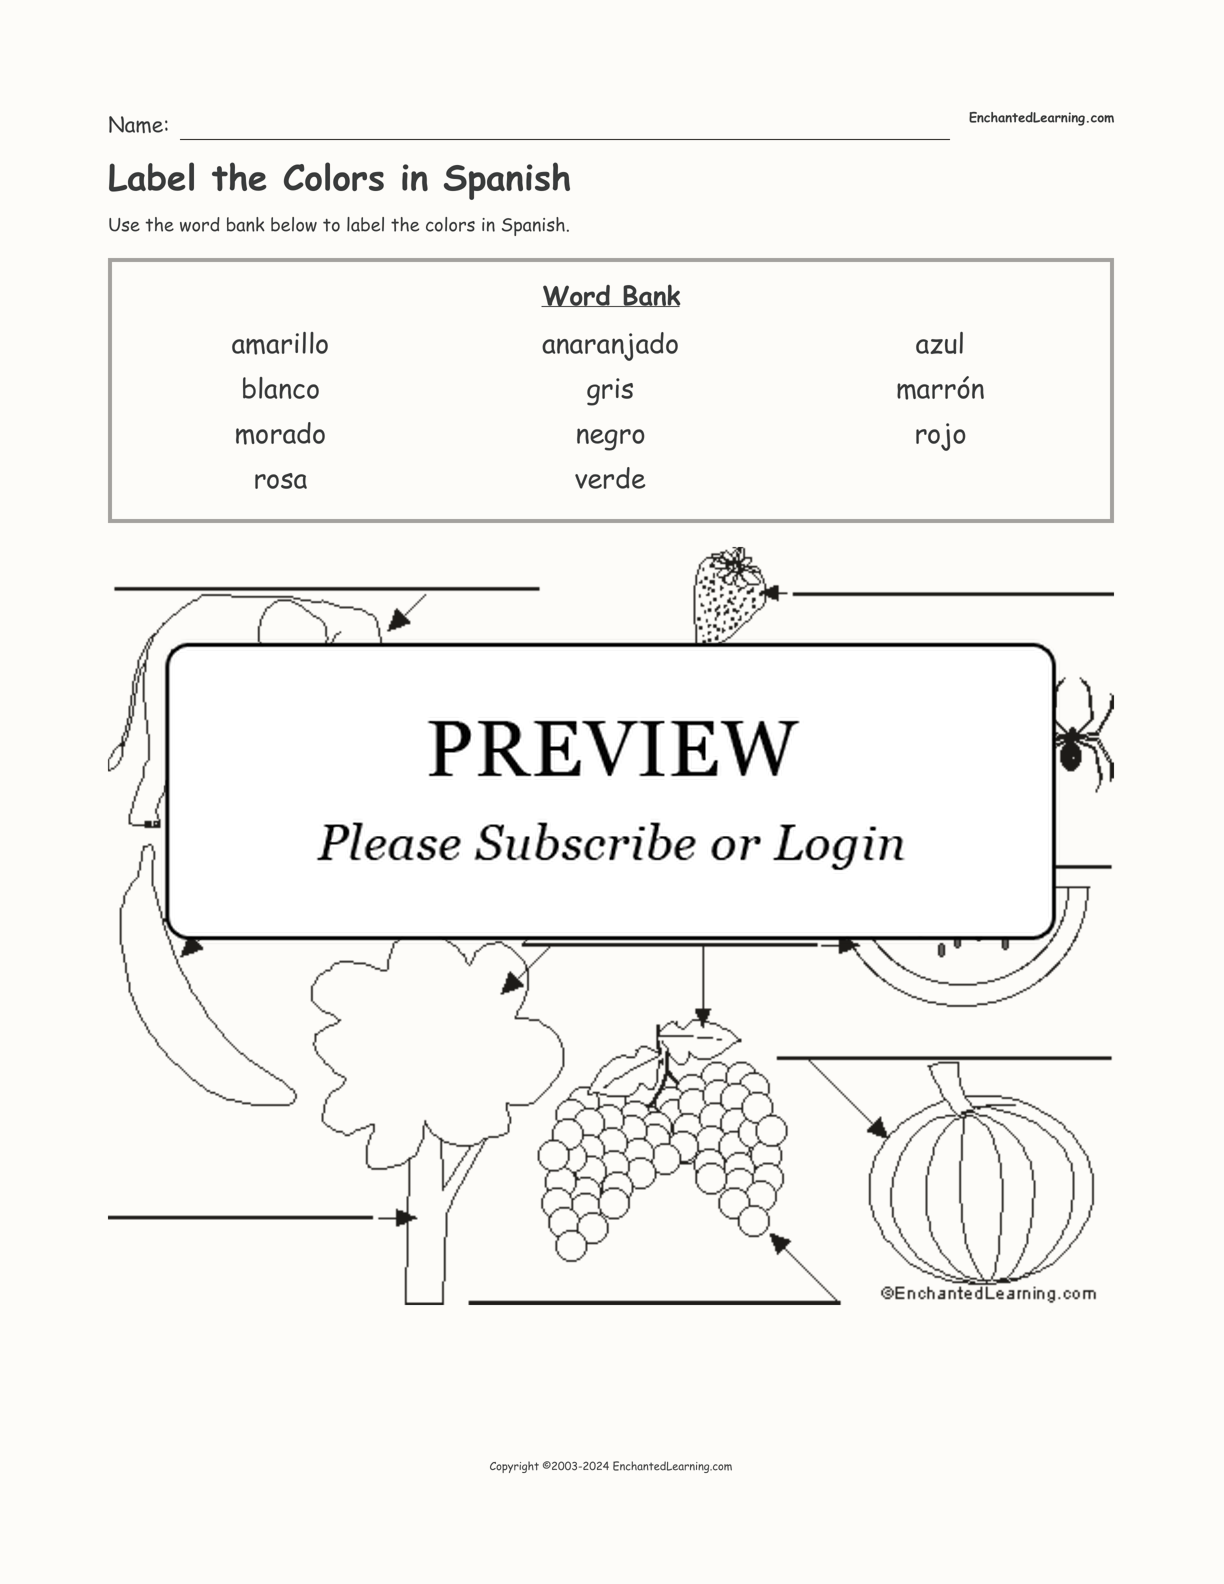 Label the Colors in Spanish interactive worksheet page 1